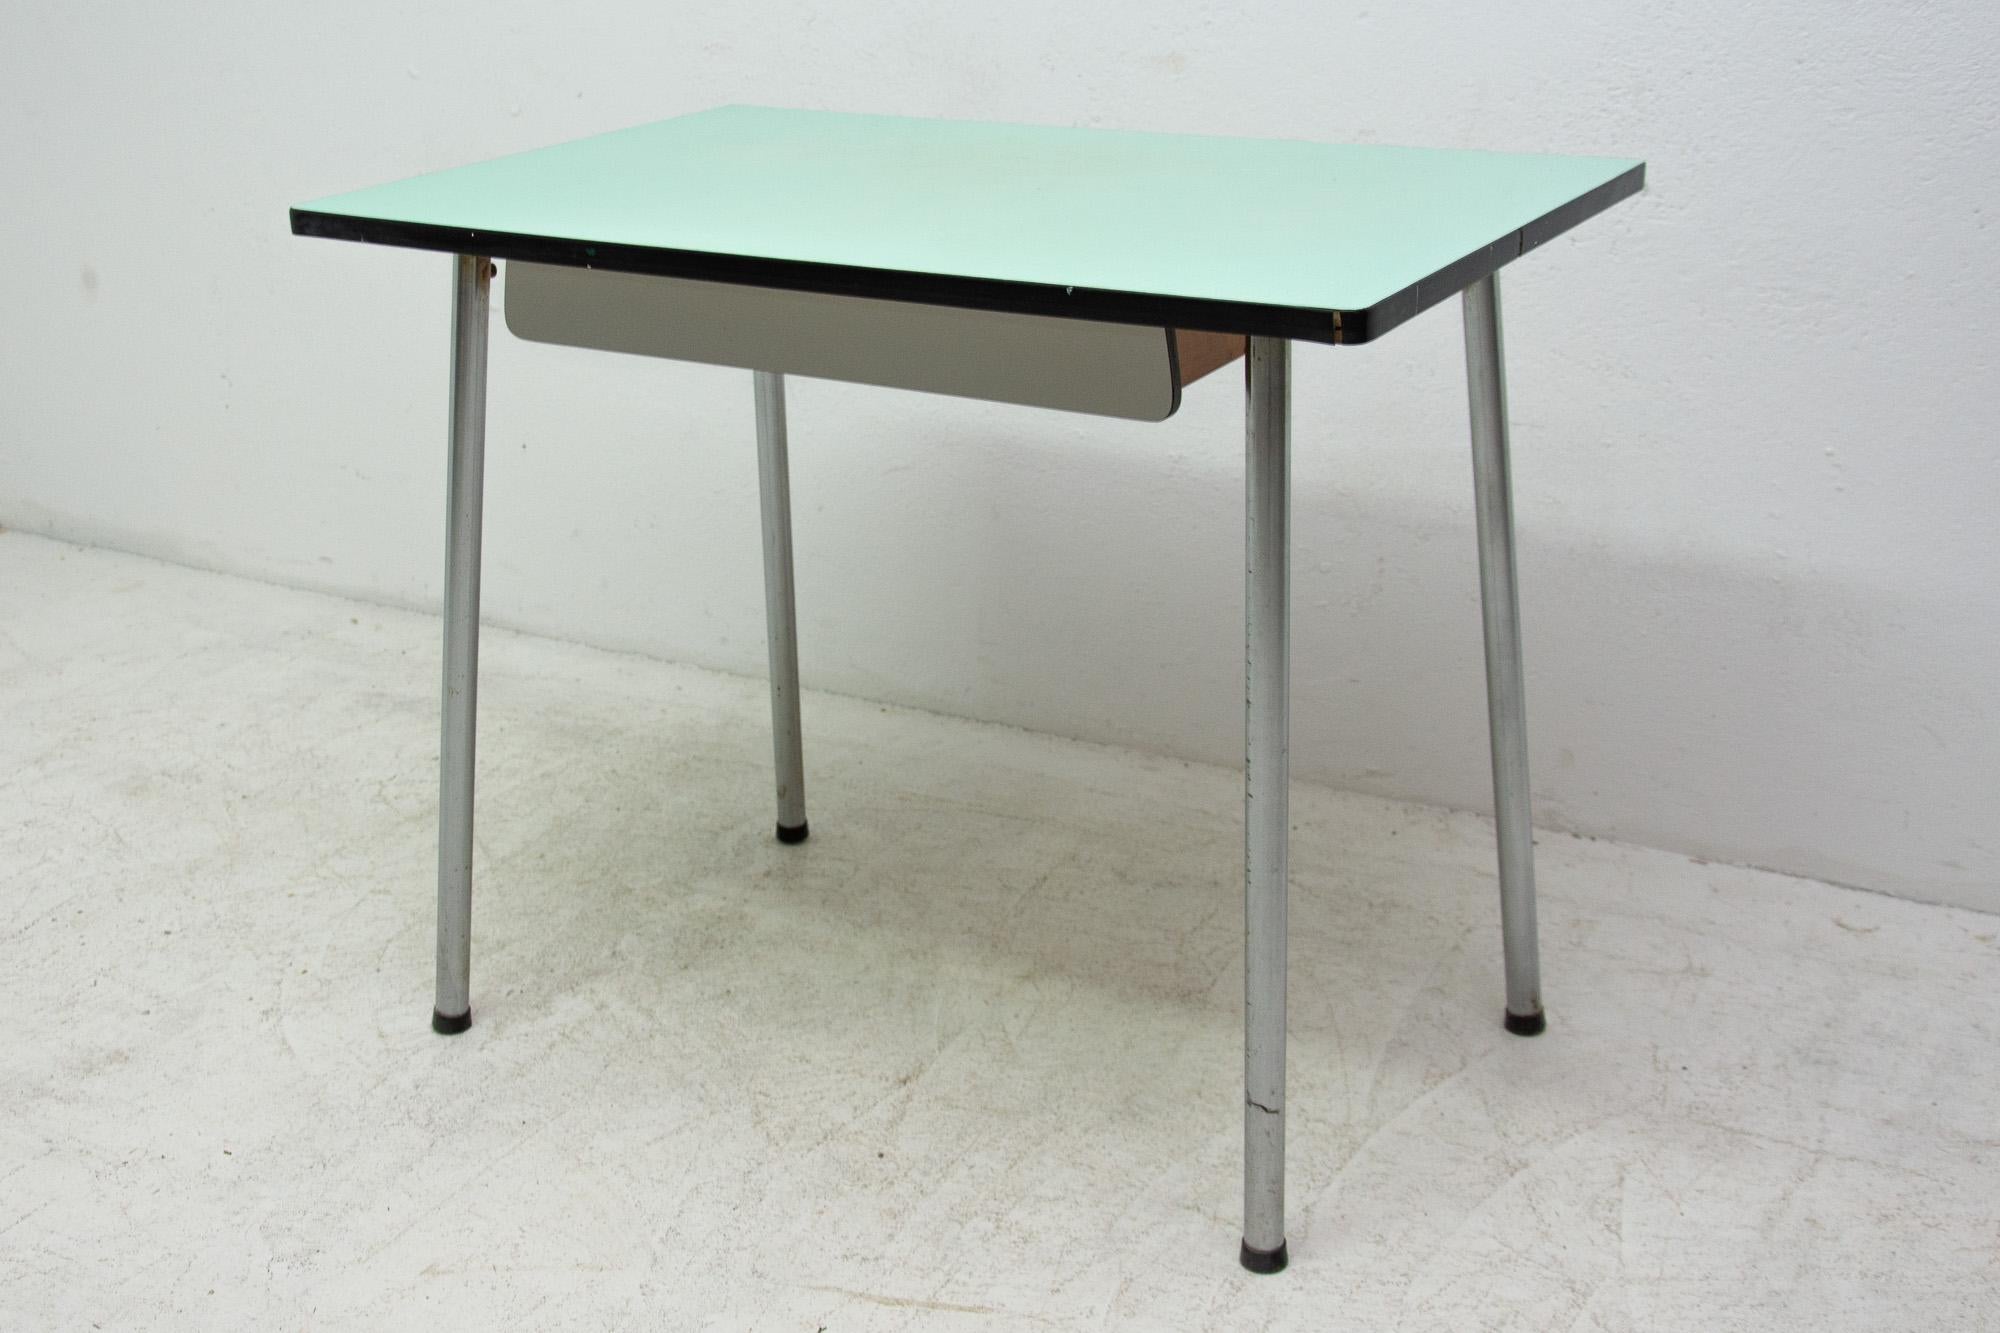 20th Century Midcentury Formica Writing Desk or Side Table, 1960s, Czechoslovakia